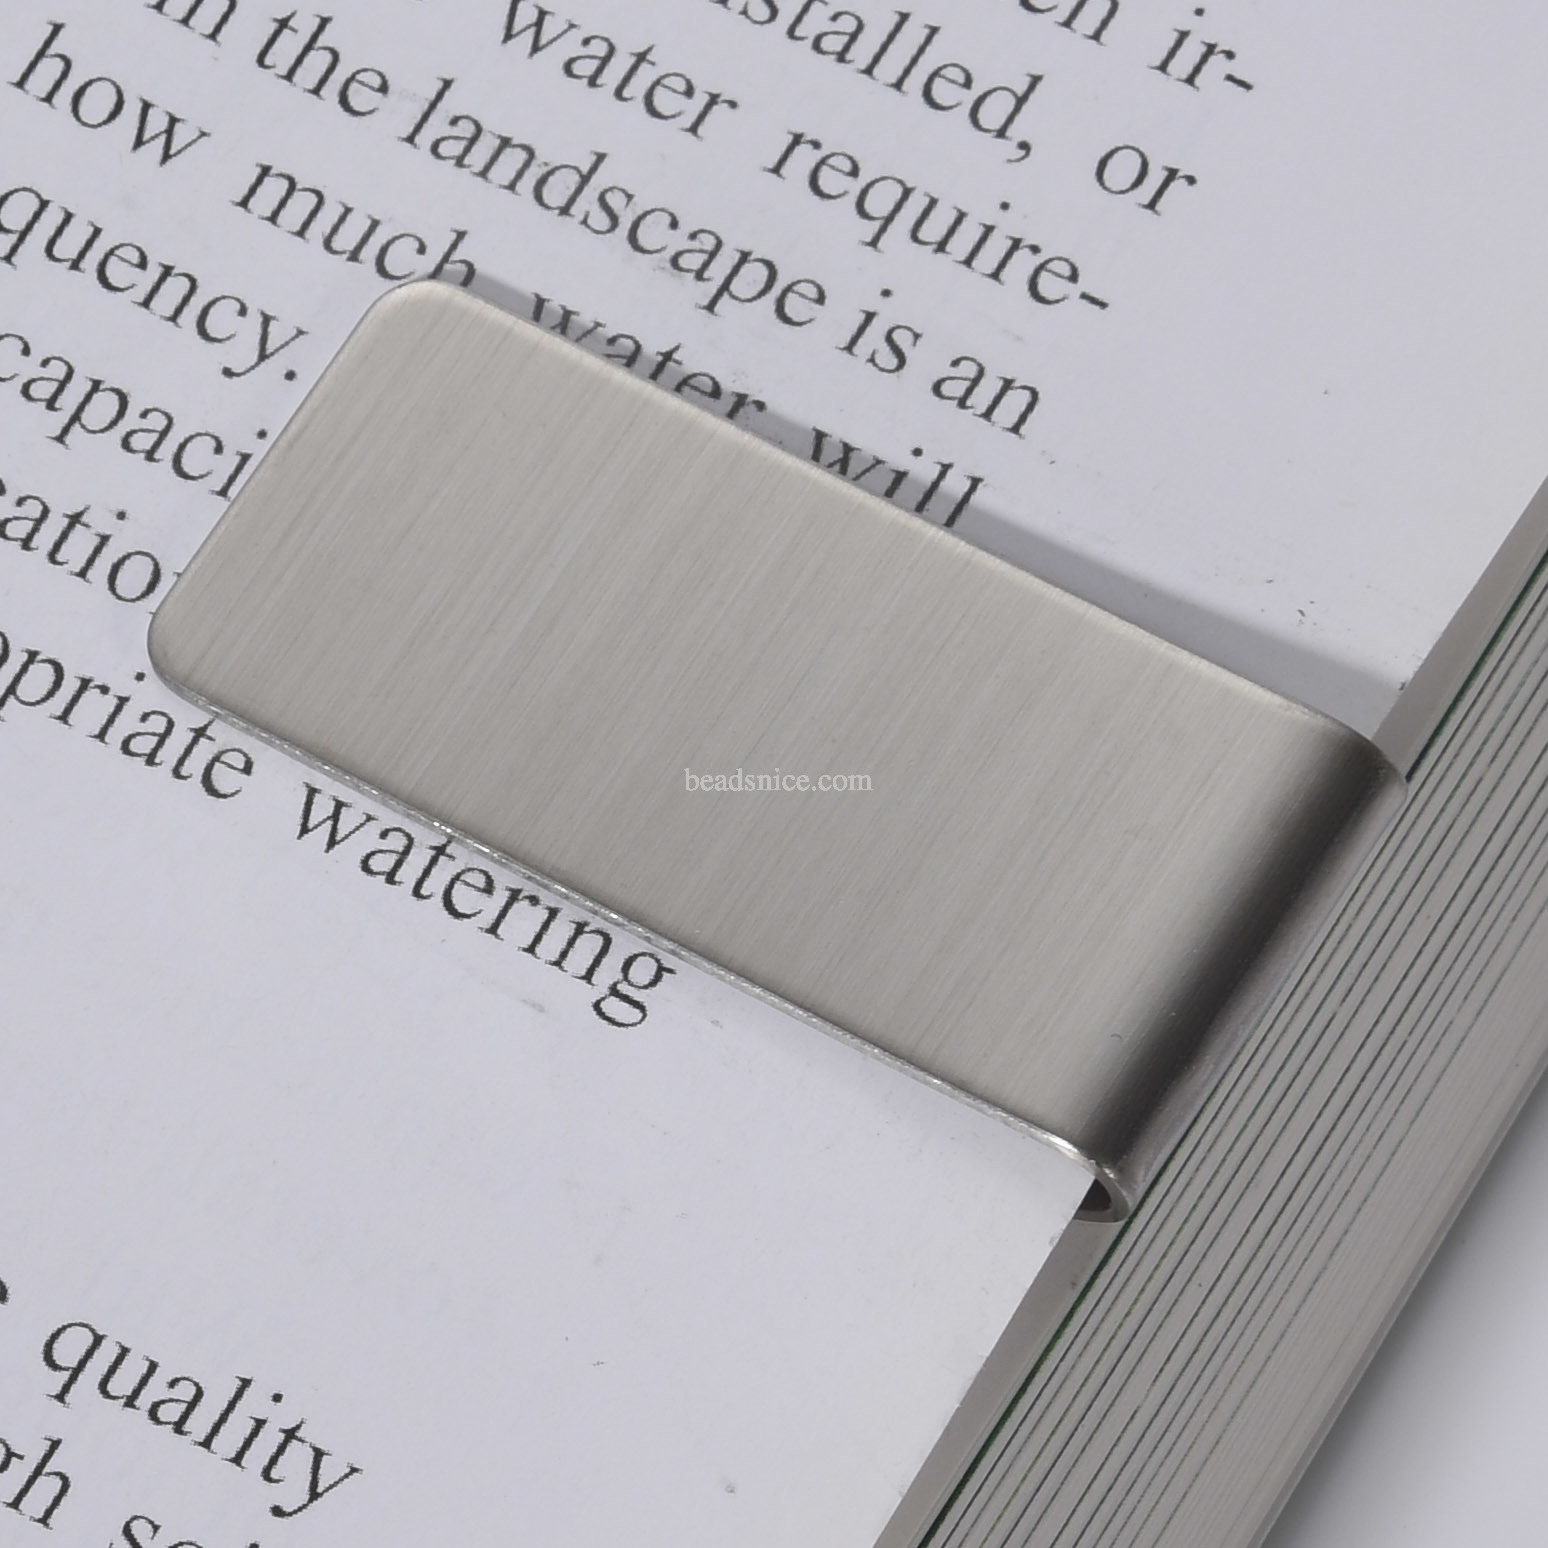 Stainless Steel Money Clip Jewelry Findings Fashion Design Clip Perfect for Father's Day Gift